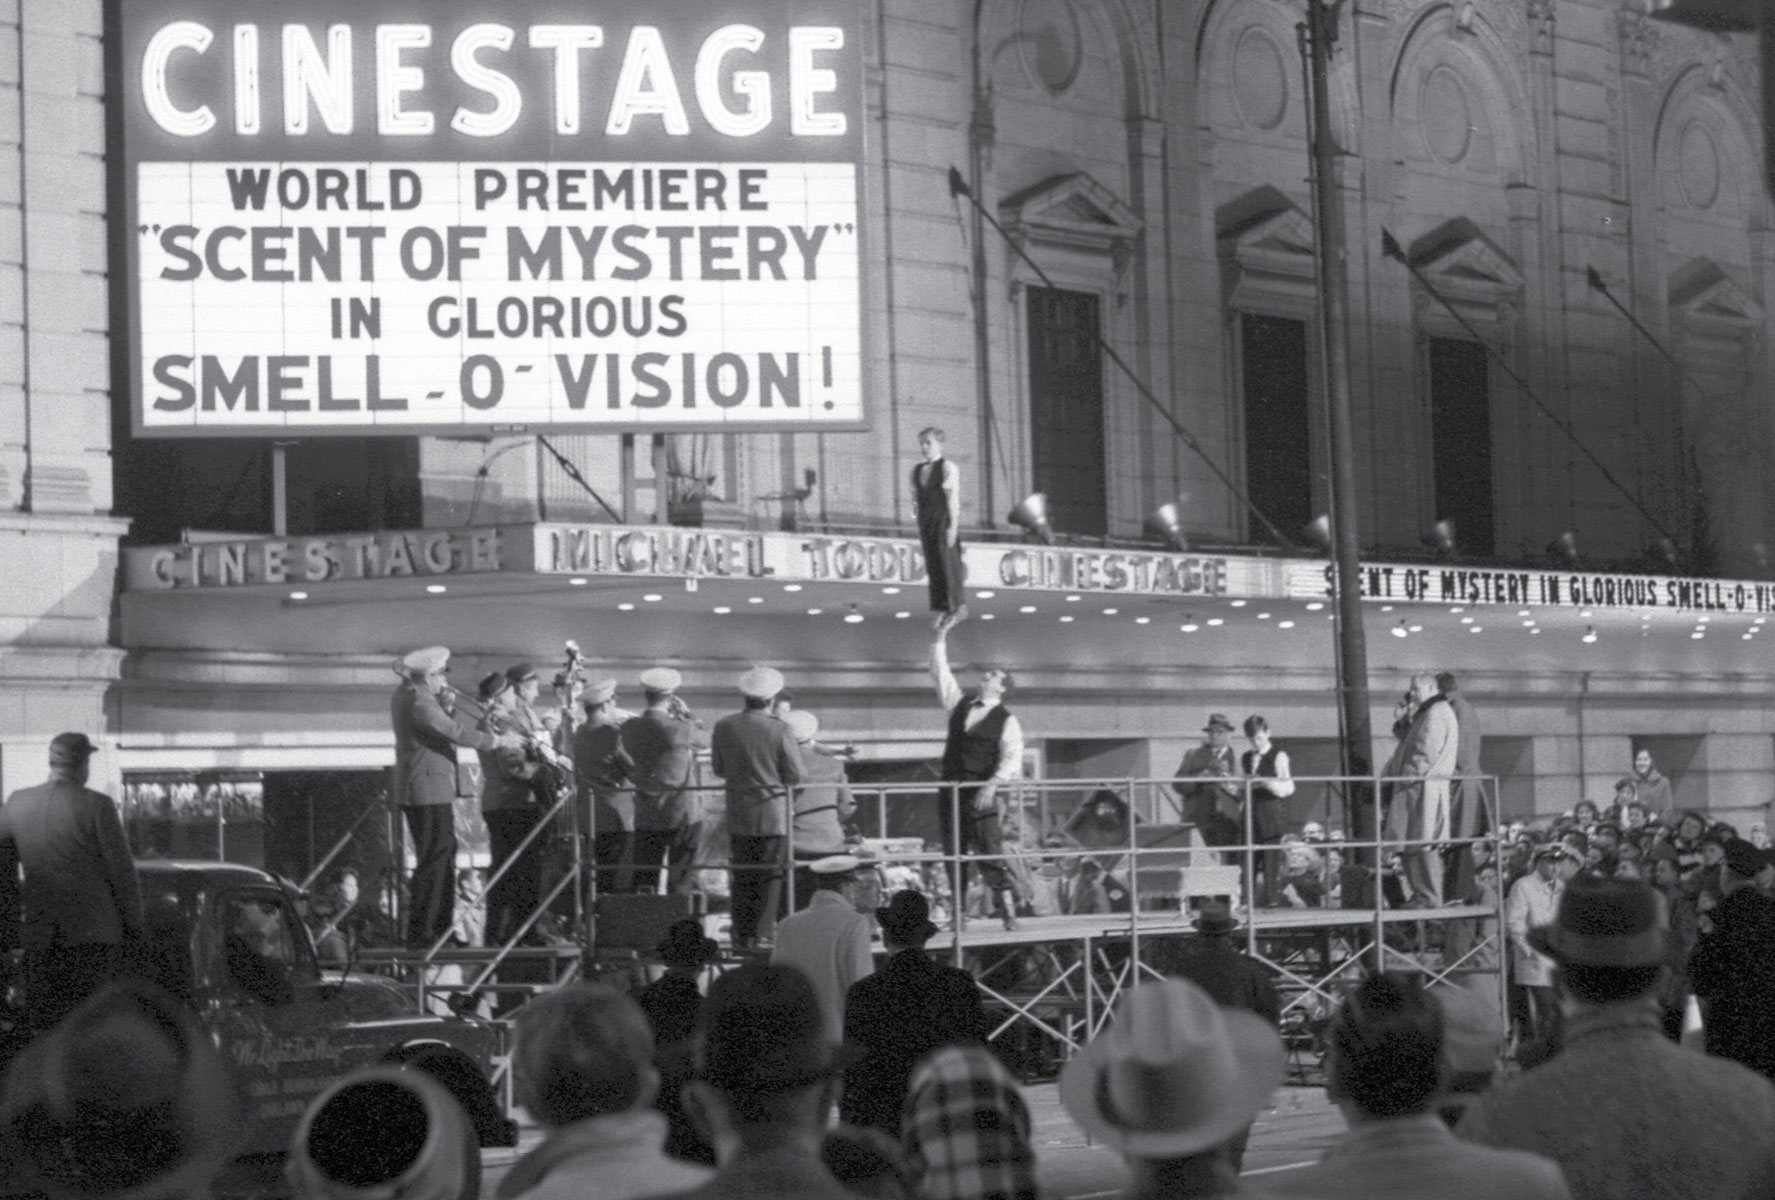 A photograph of Chicago's Cinestage marquee on the January sixth nineteen sixty debut of Smell-o-Vision.